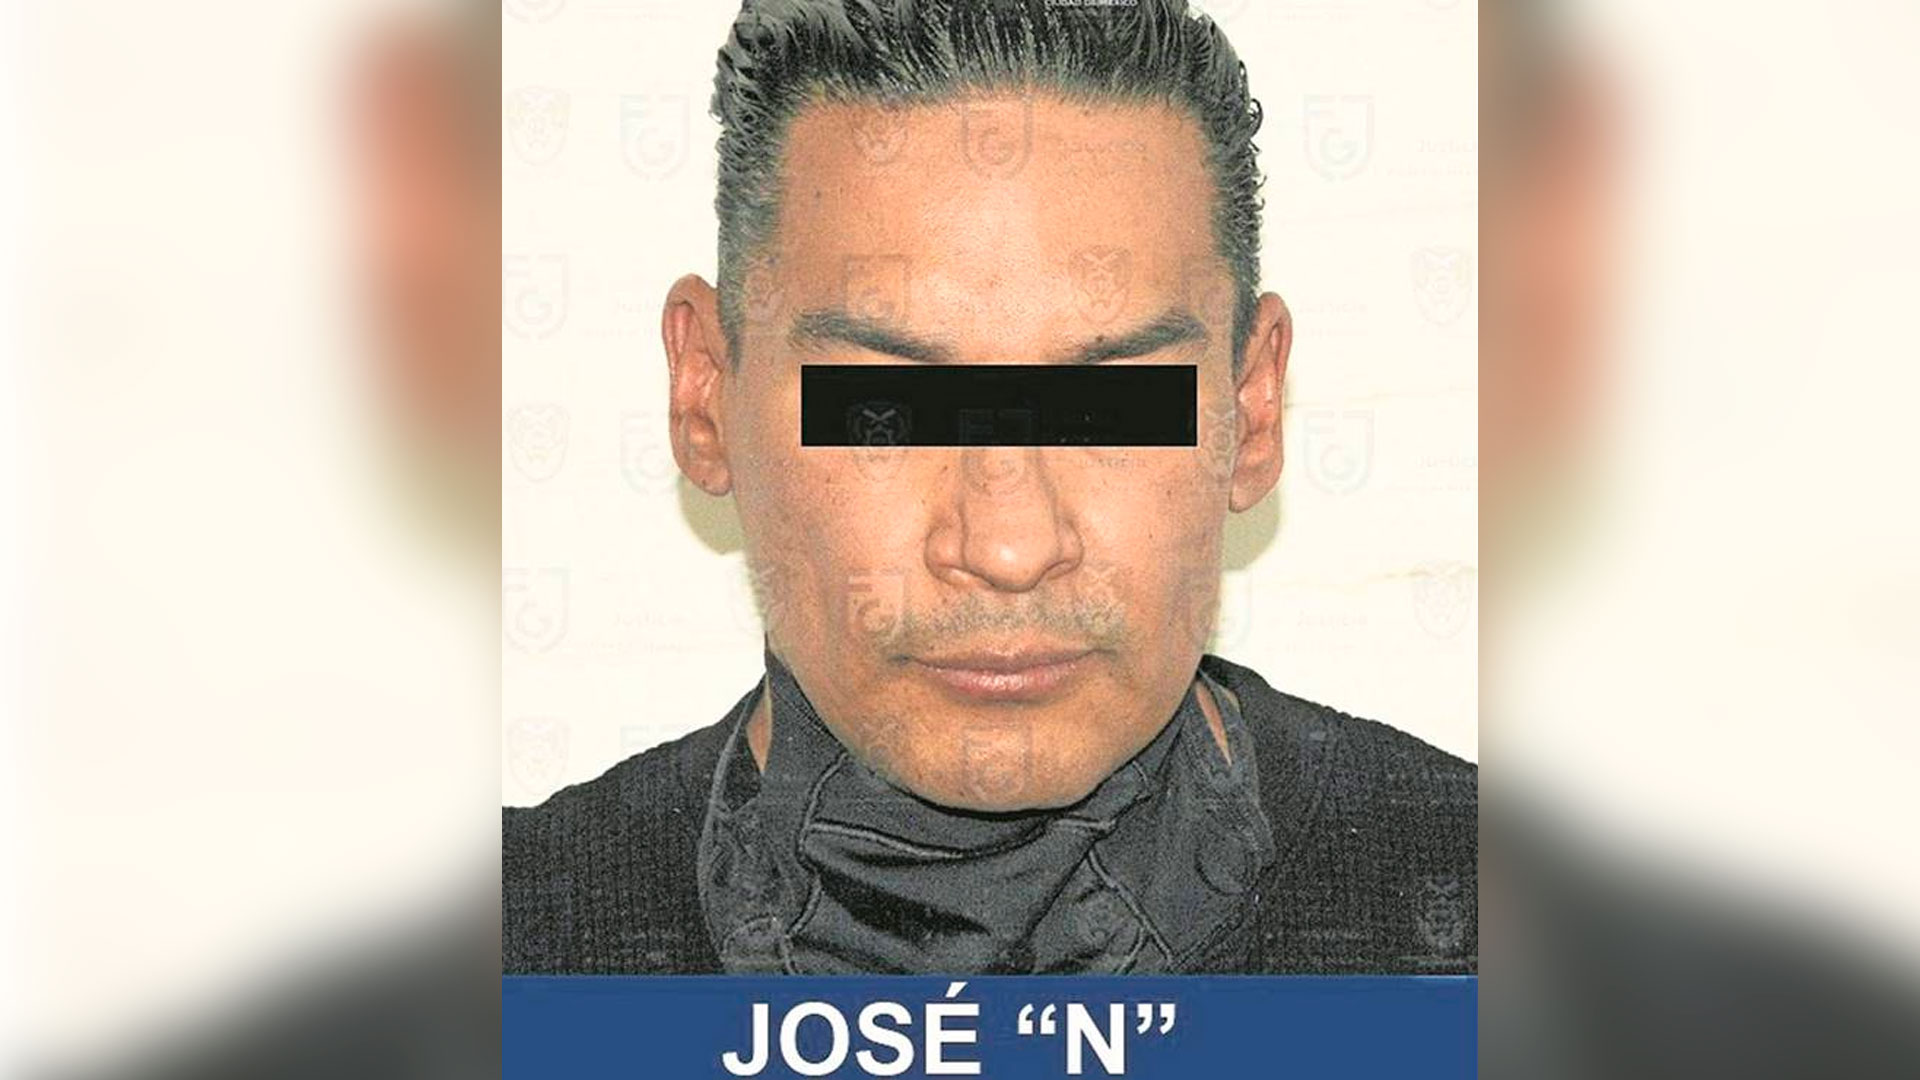 José, alias Manu Vaquita, was captured for his alleged responsibility in the murder of the former governor of Jalisco, Aristóteles Sandoval